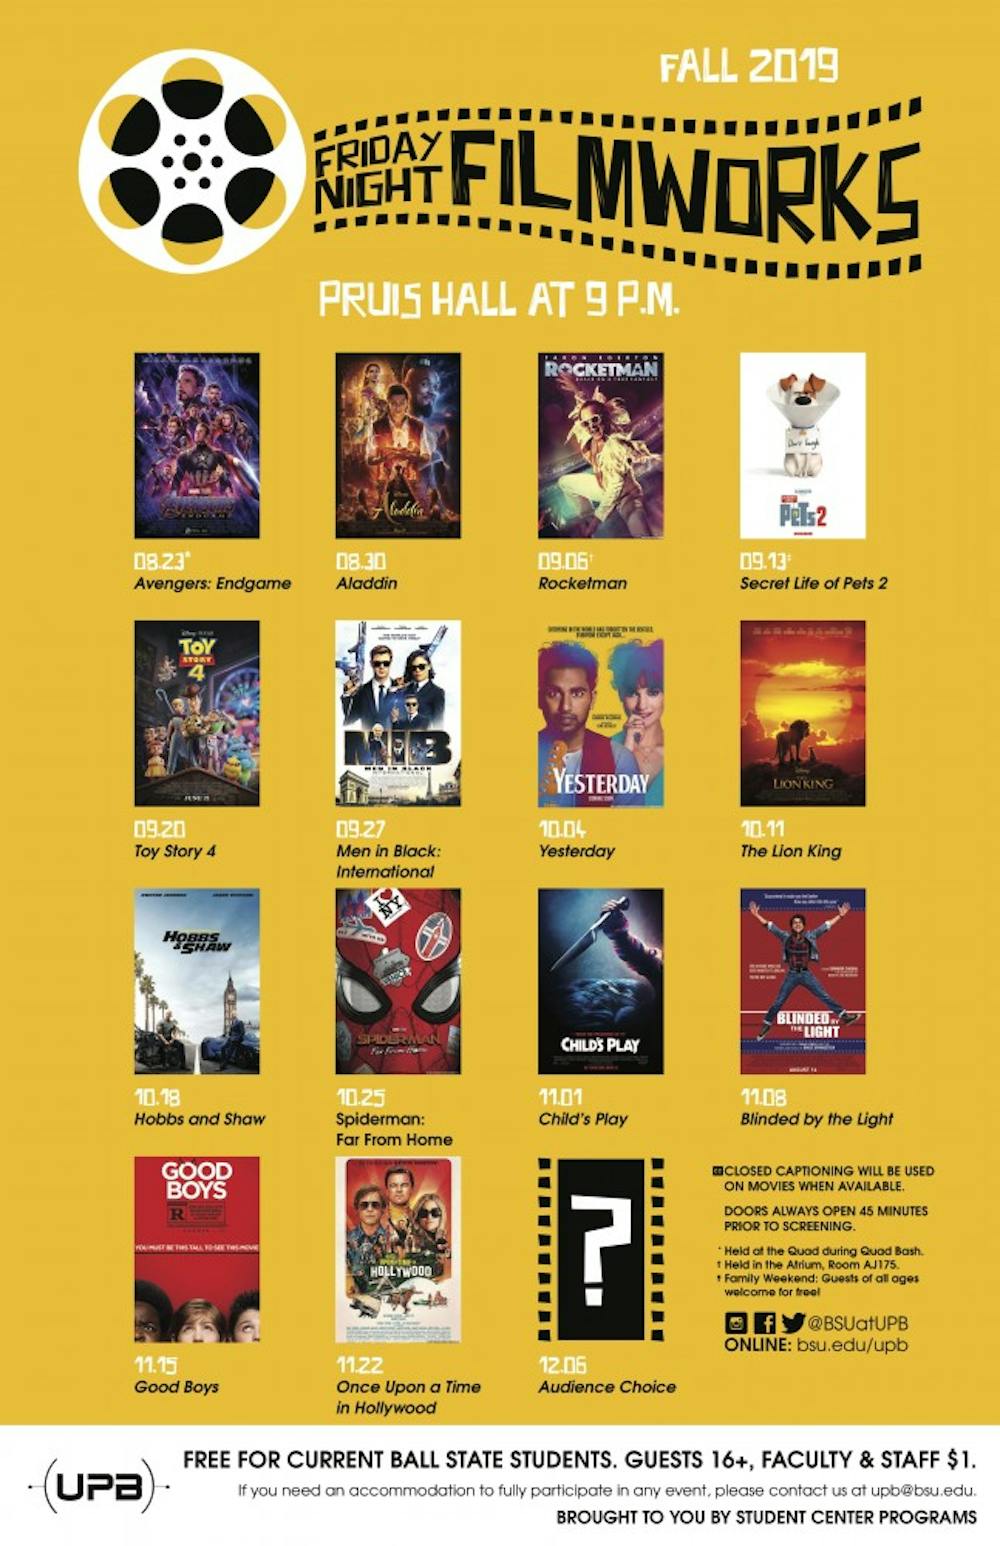 <p>The University Program Board (UPB) has released its movie lineup for the fall 2019 semester. Films will be shown at 9 p.m. on Fridays. <strong>University Program Board, Photo Provided.&nbsp;</strong></p>